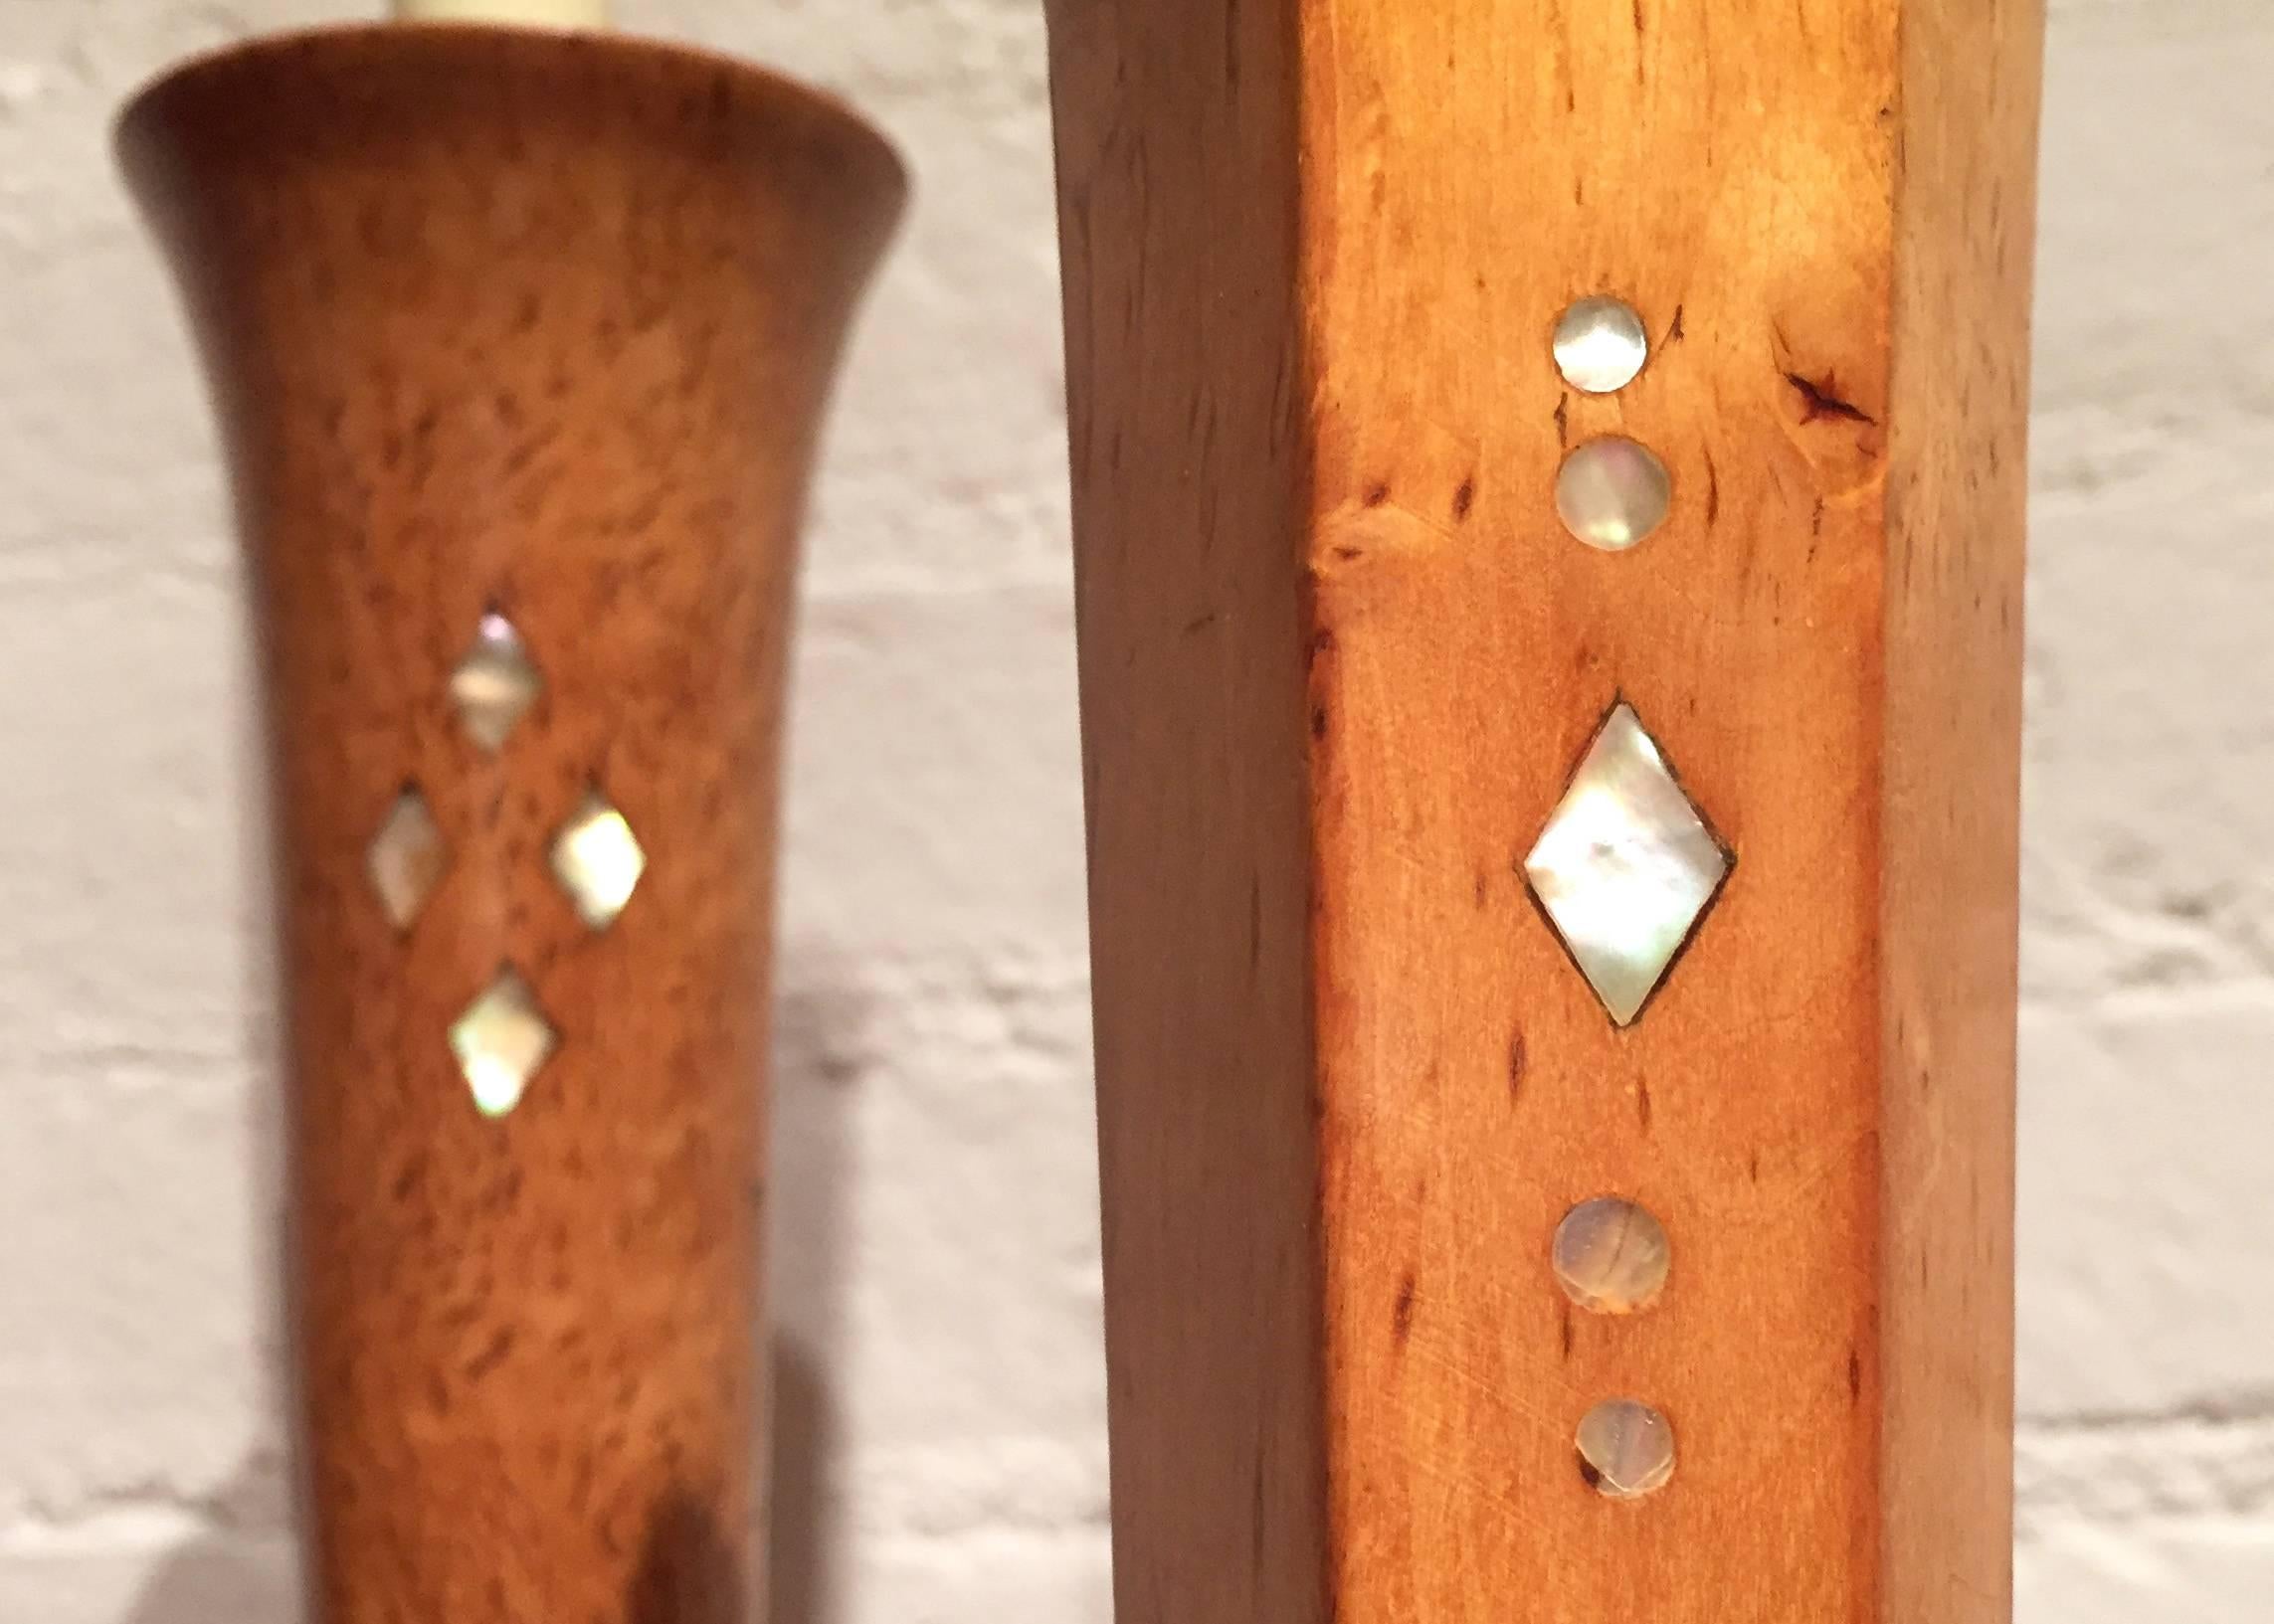 A pair of karelian birch candlesticks with mother-of-pearl inlay, c. 1910.